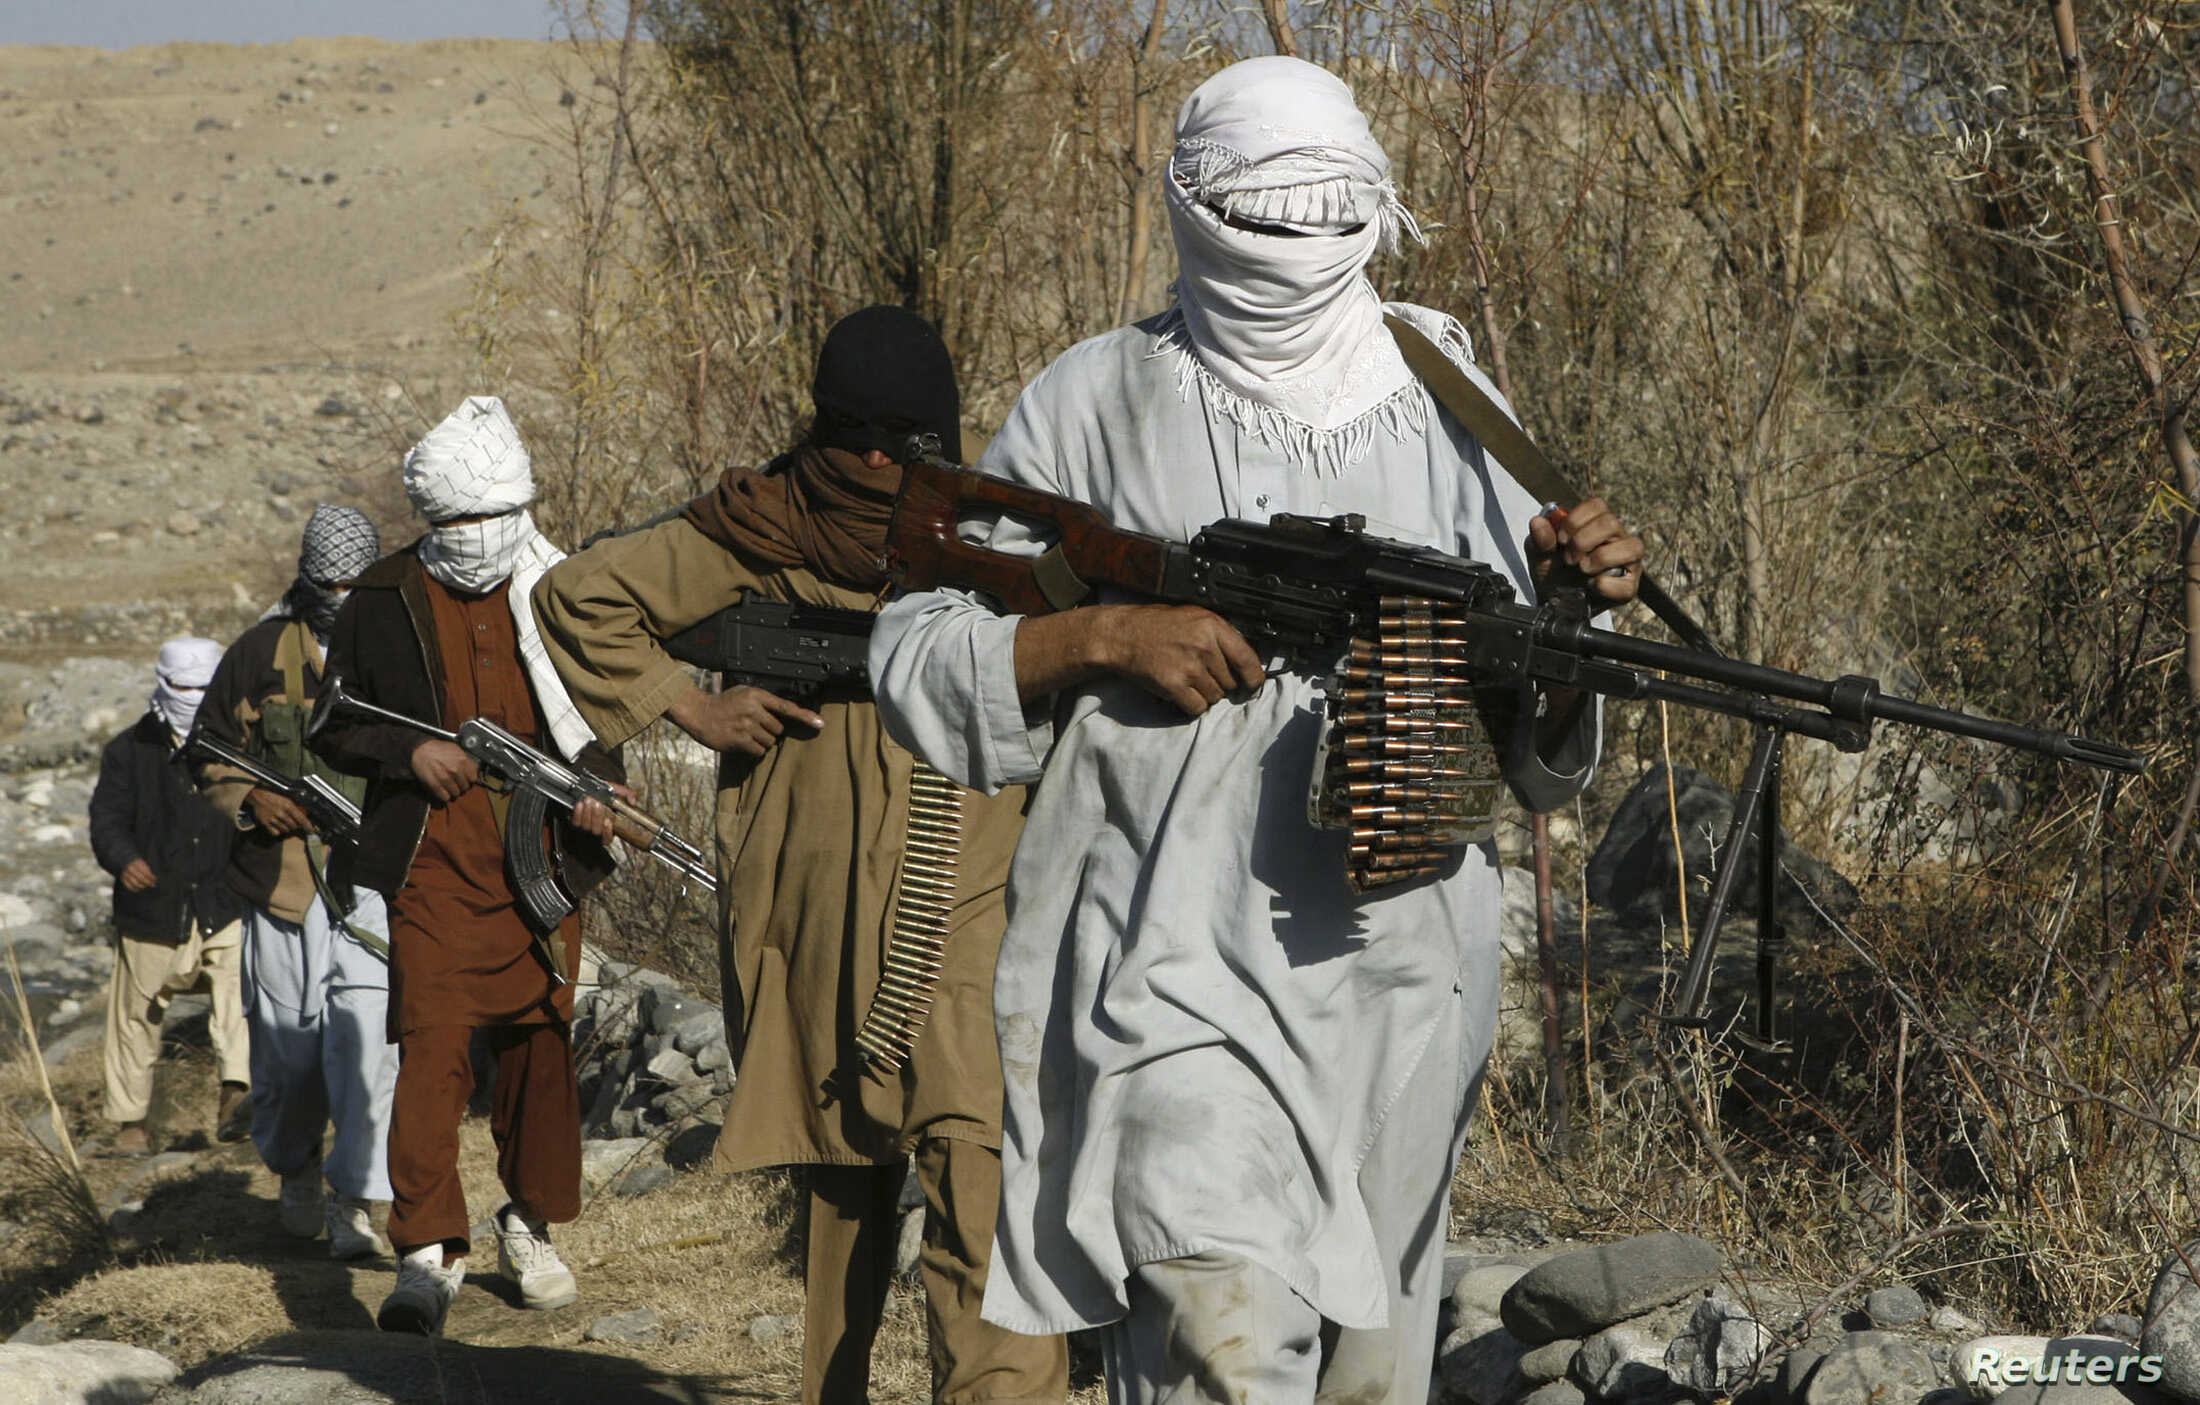 Taliban opens up on ISIS terrorists in Afghanistan